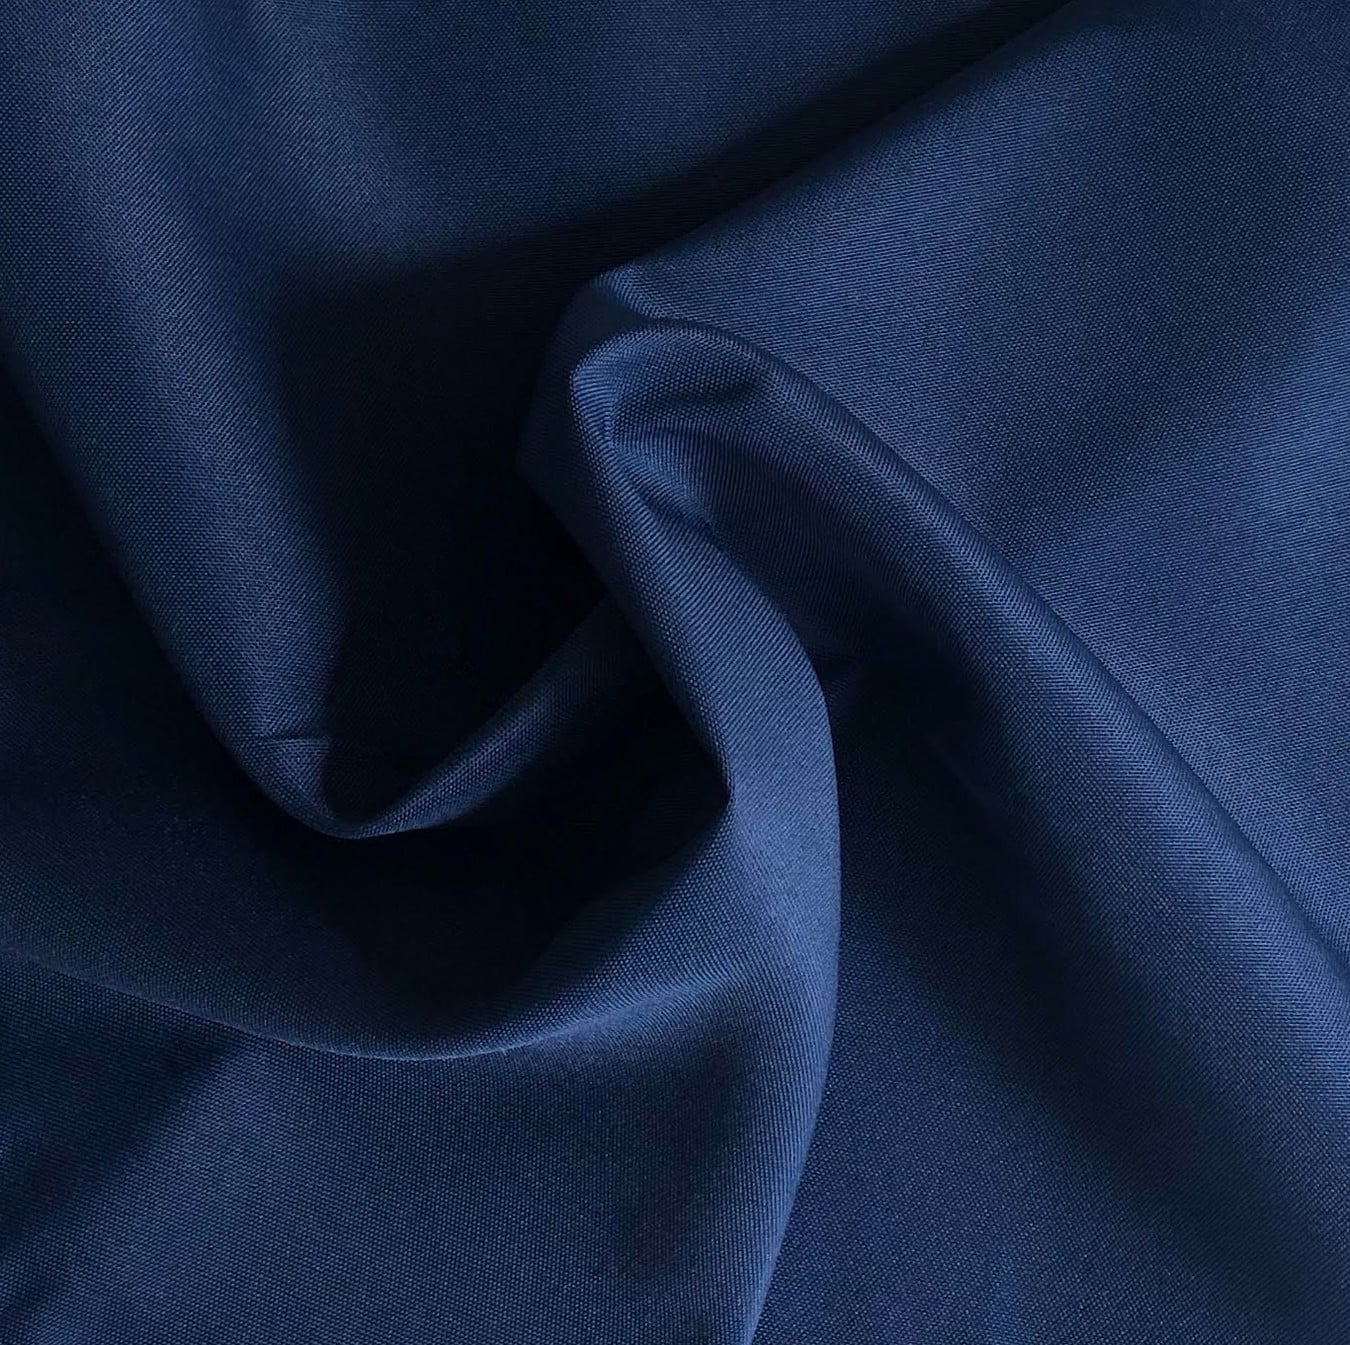 Featured image for “Navy Blue Napkin”